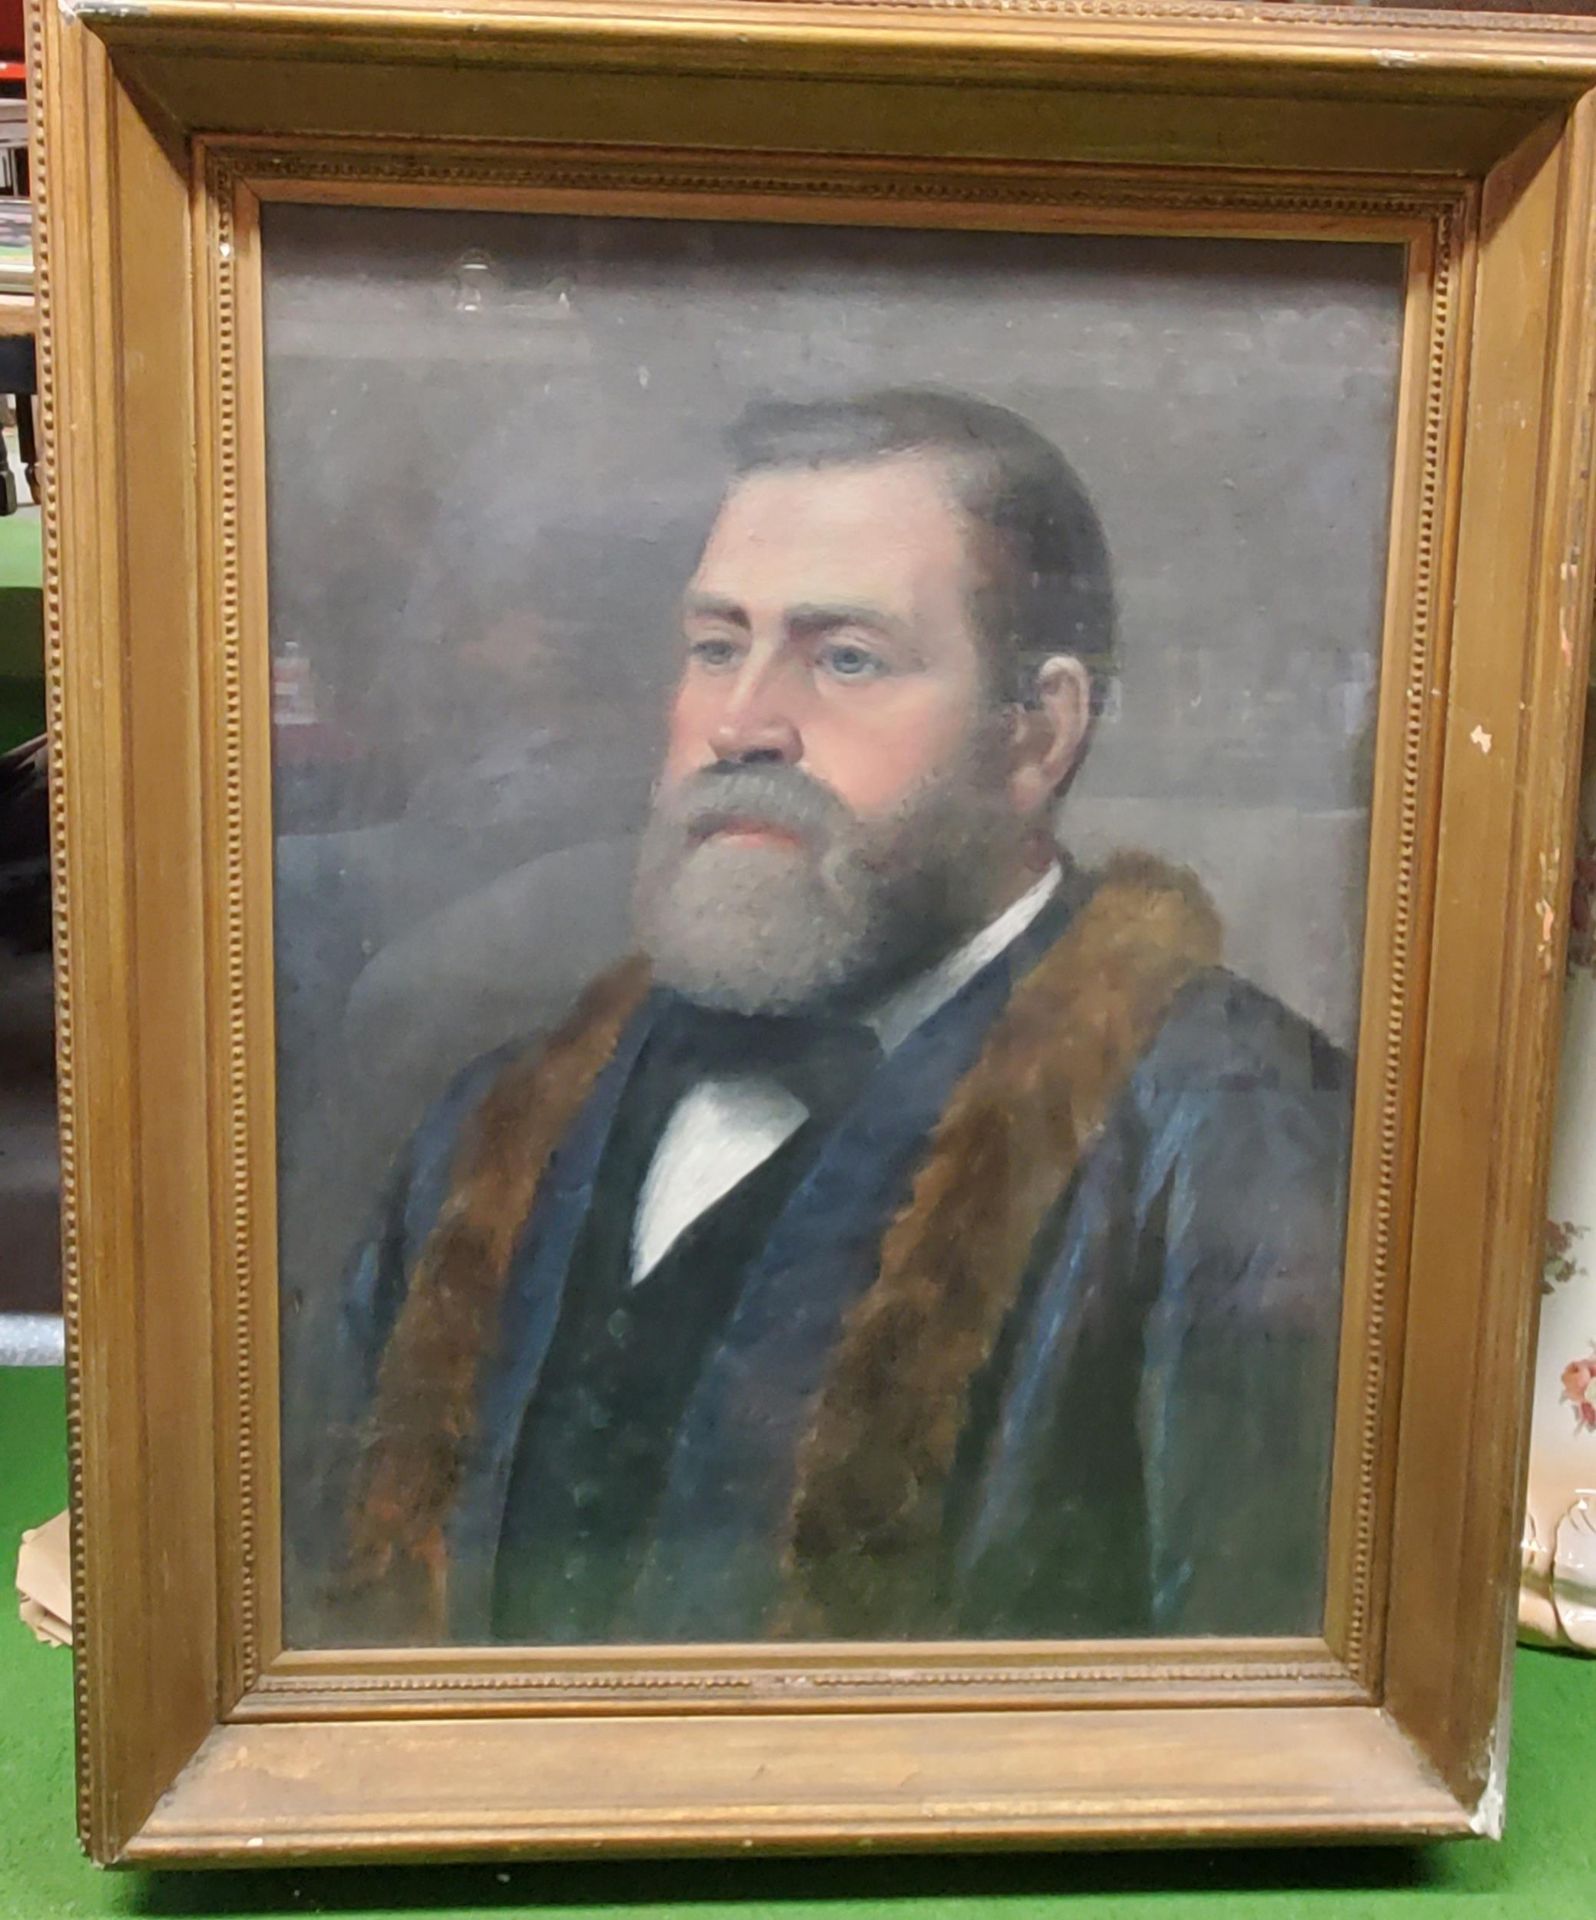 A GILT FRAMED OIL ON CANVAS OF A WELL DRESSED GENTLEMAN